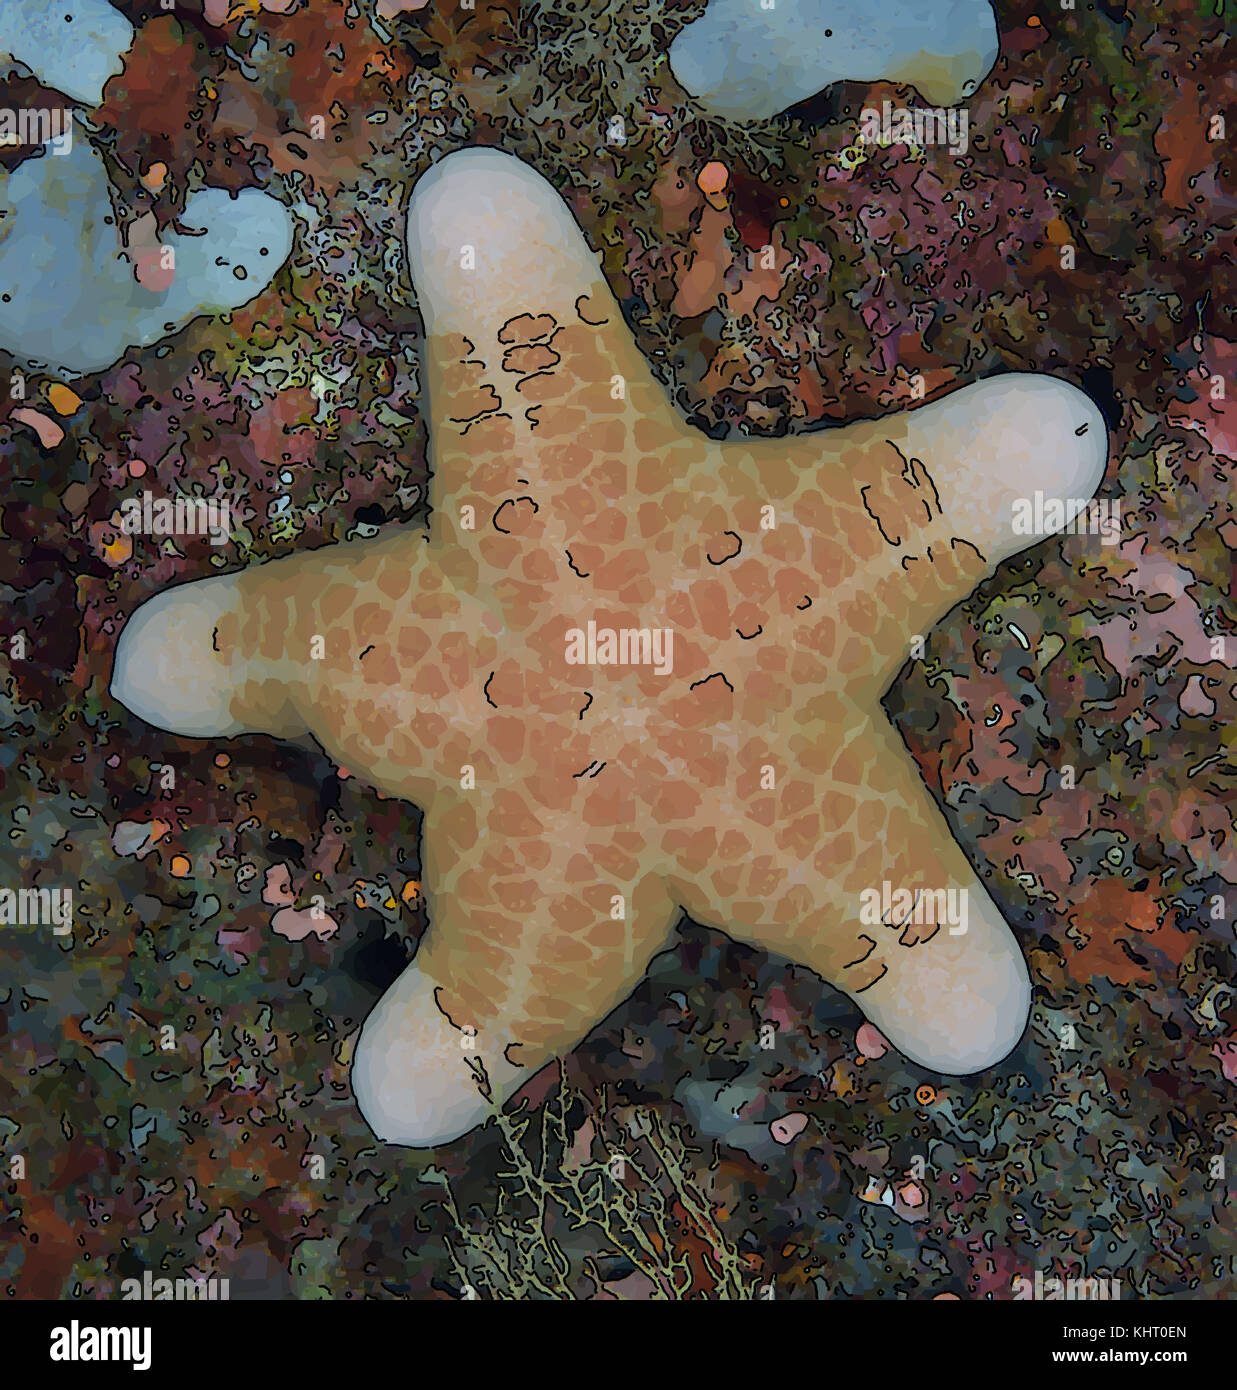 Choriaster granulatus, the granulated sea star, clinging to a wall colorful wall covered with soft coral and other marine life. Stock Photo